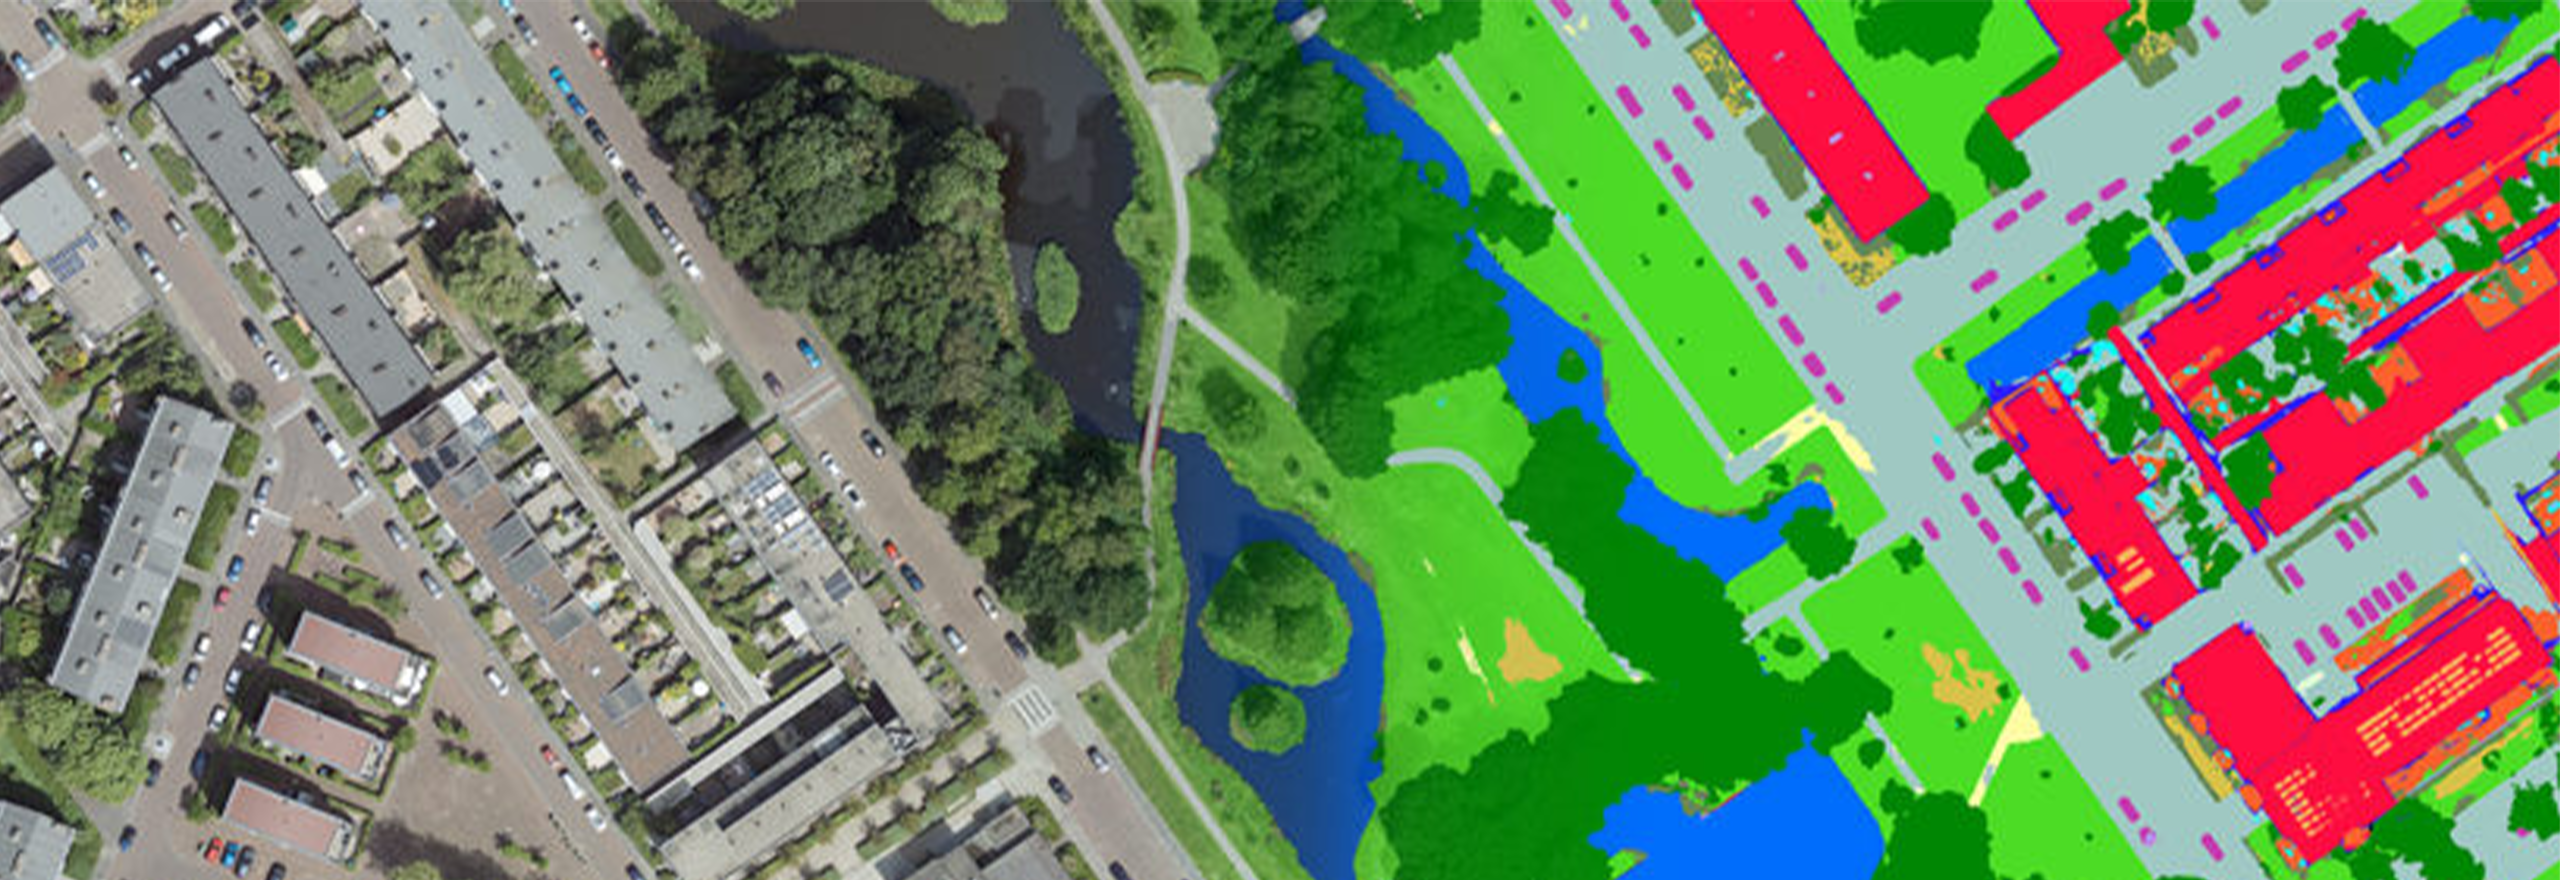 Aerial imagery overlaid with land cover map from artificial intelligence 